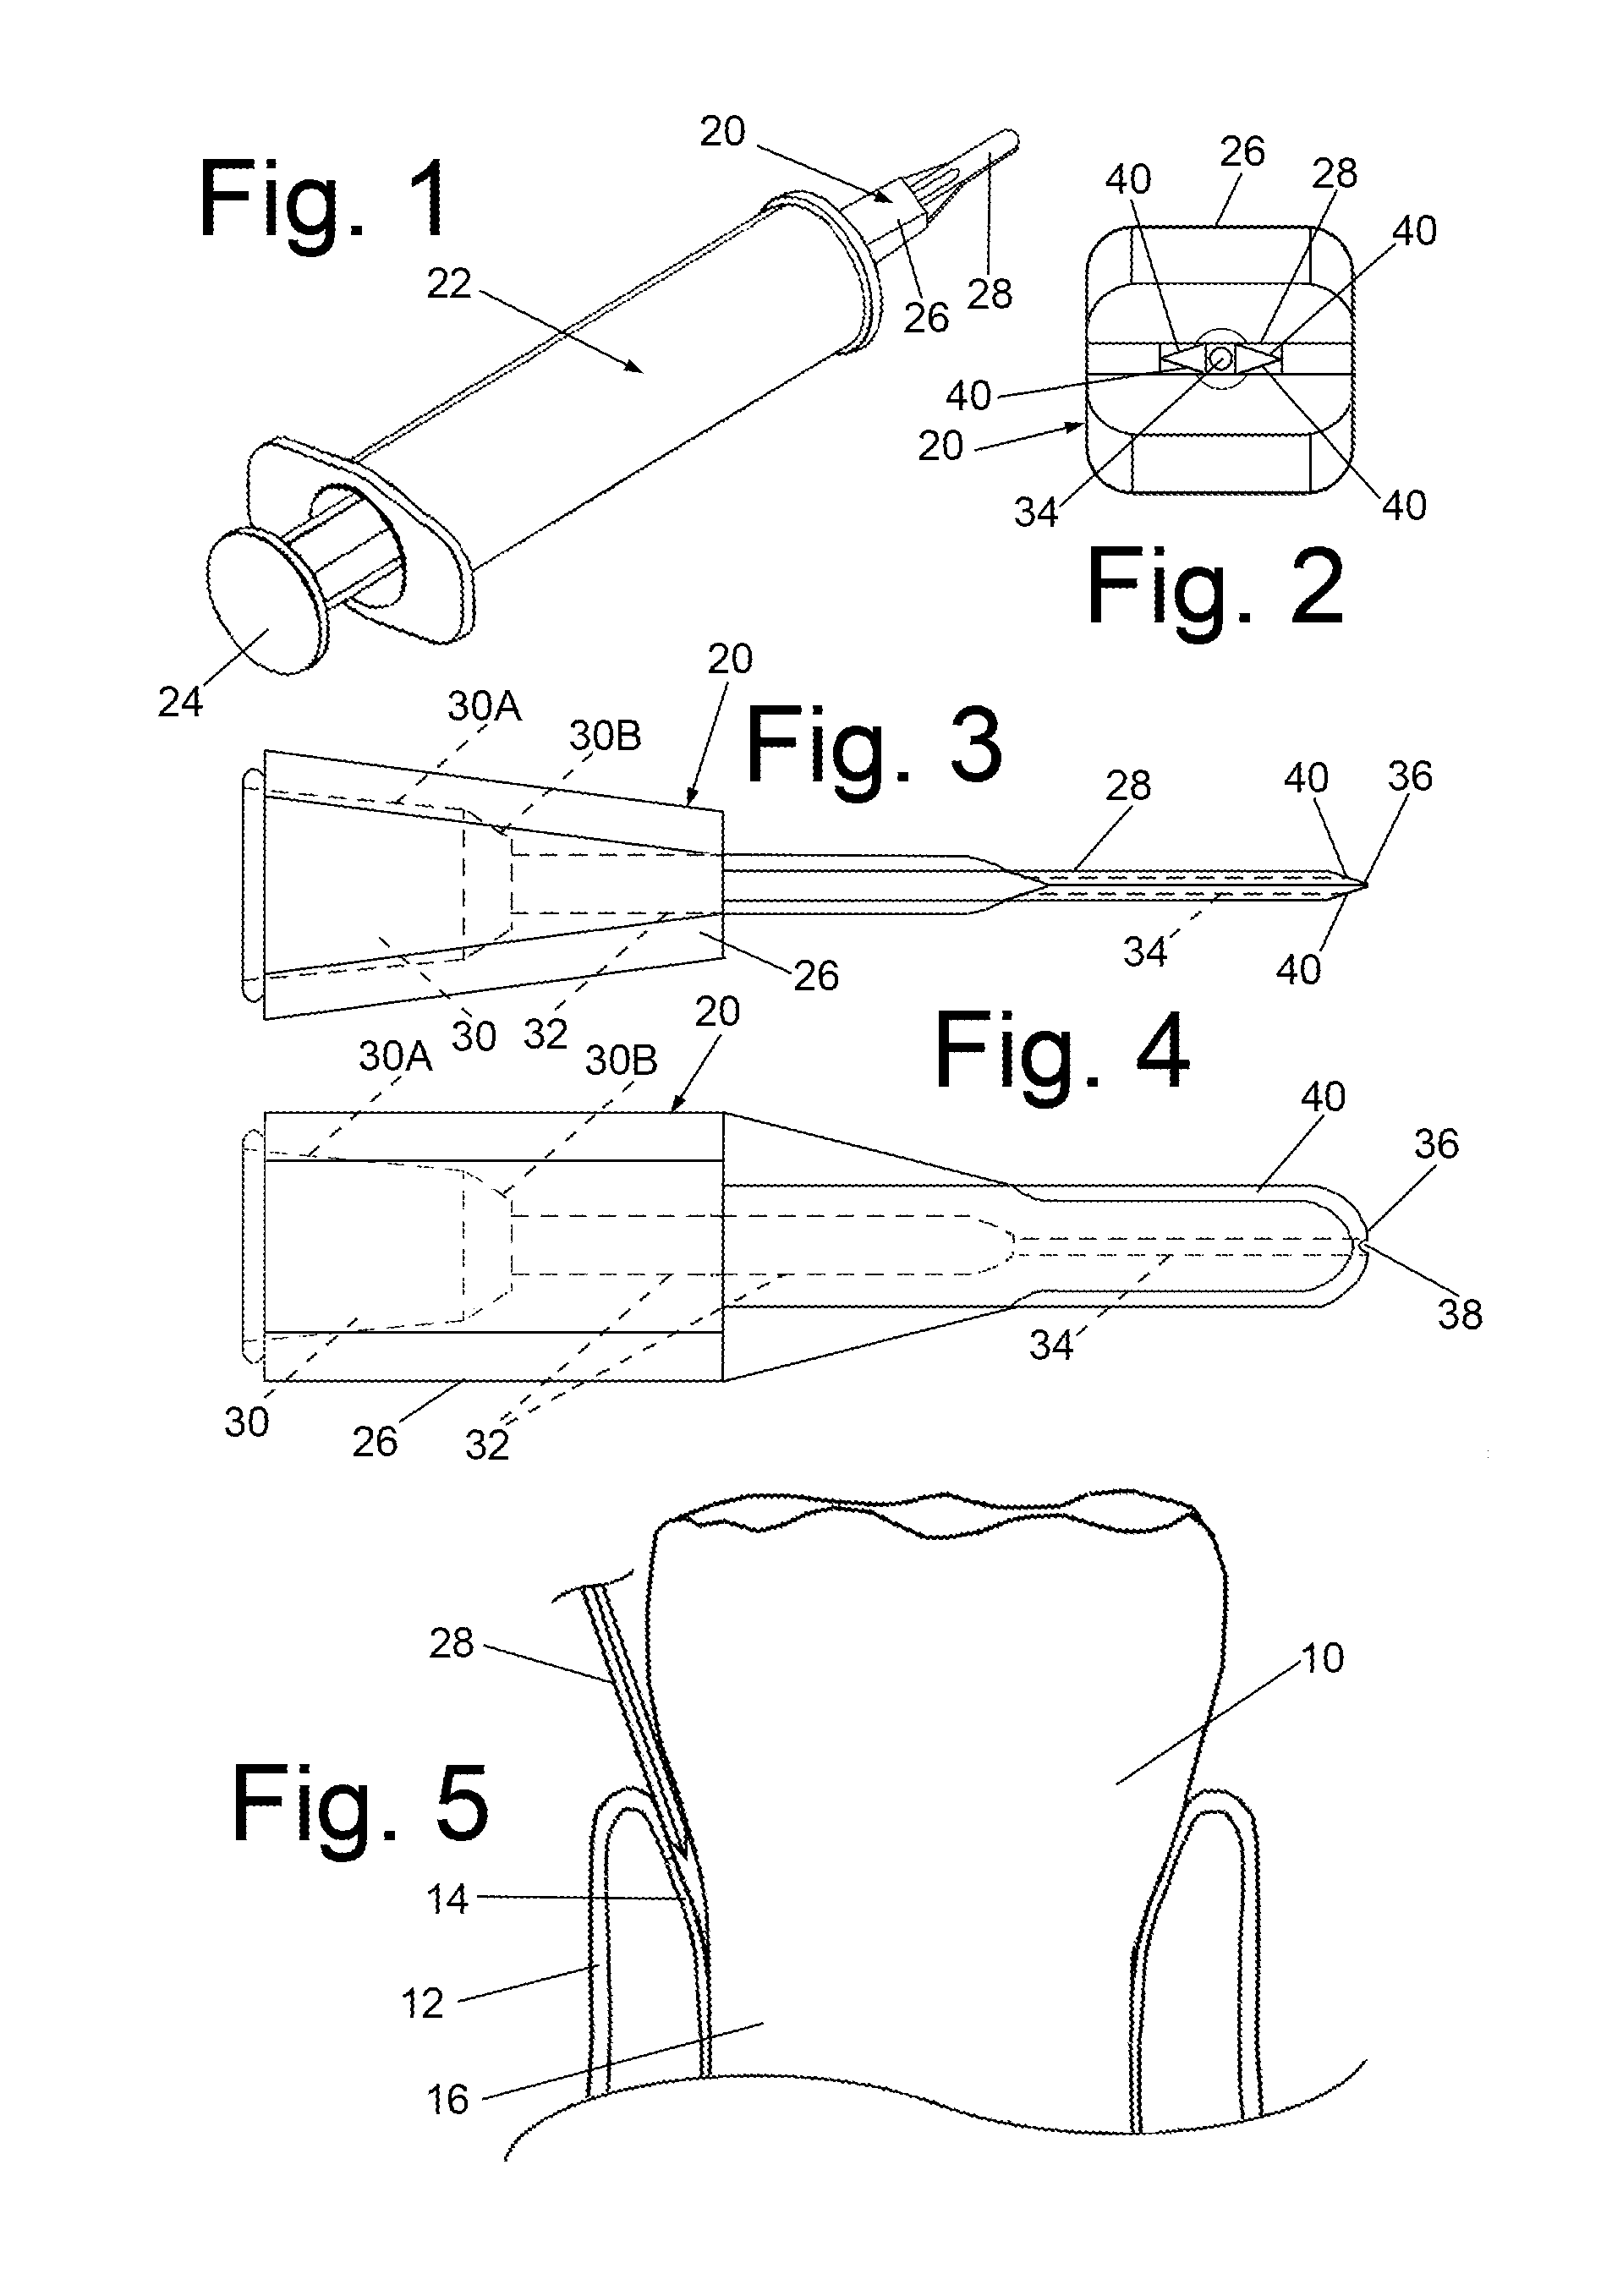 Articulating applicators/injectors for administration of liquid anesthetic and other liquids